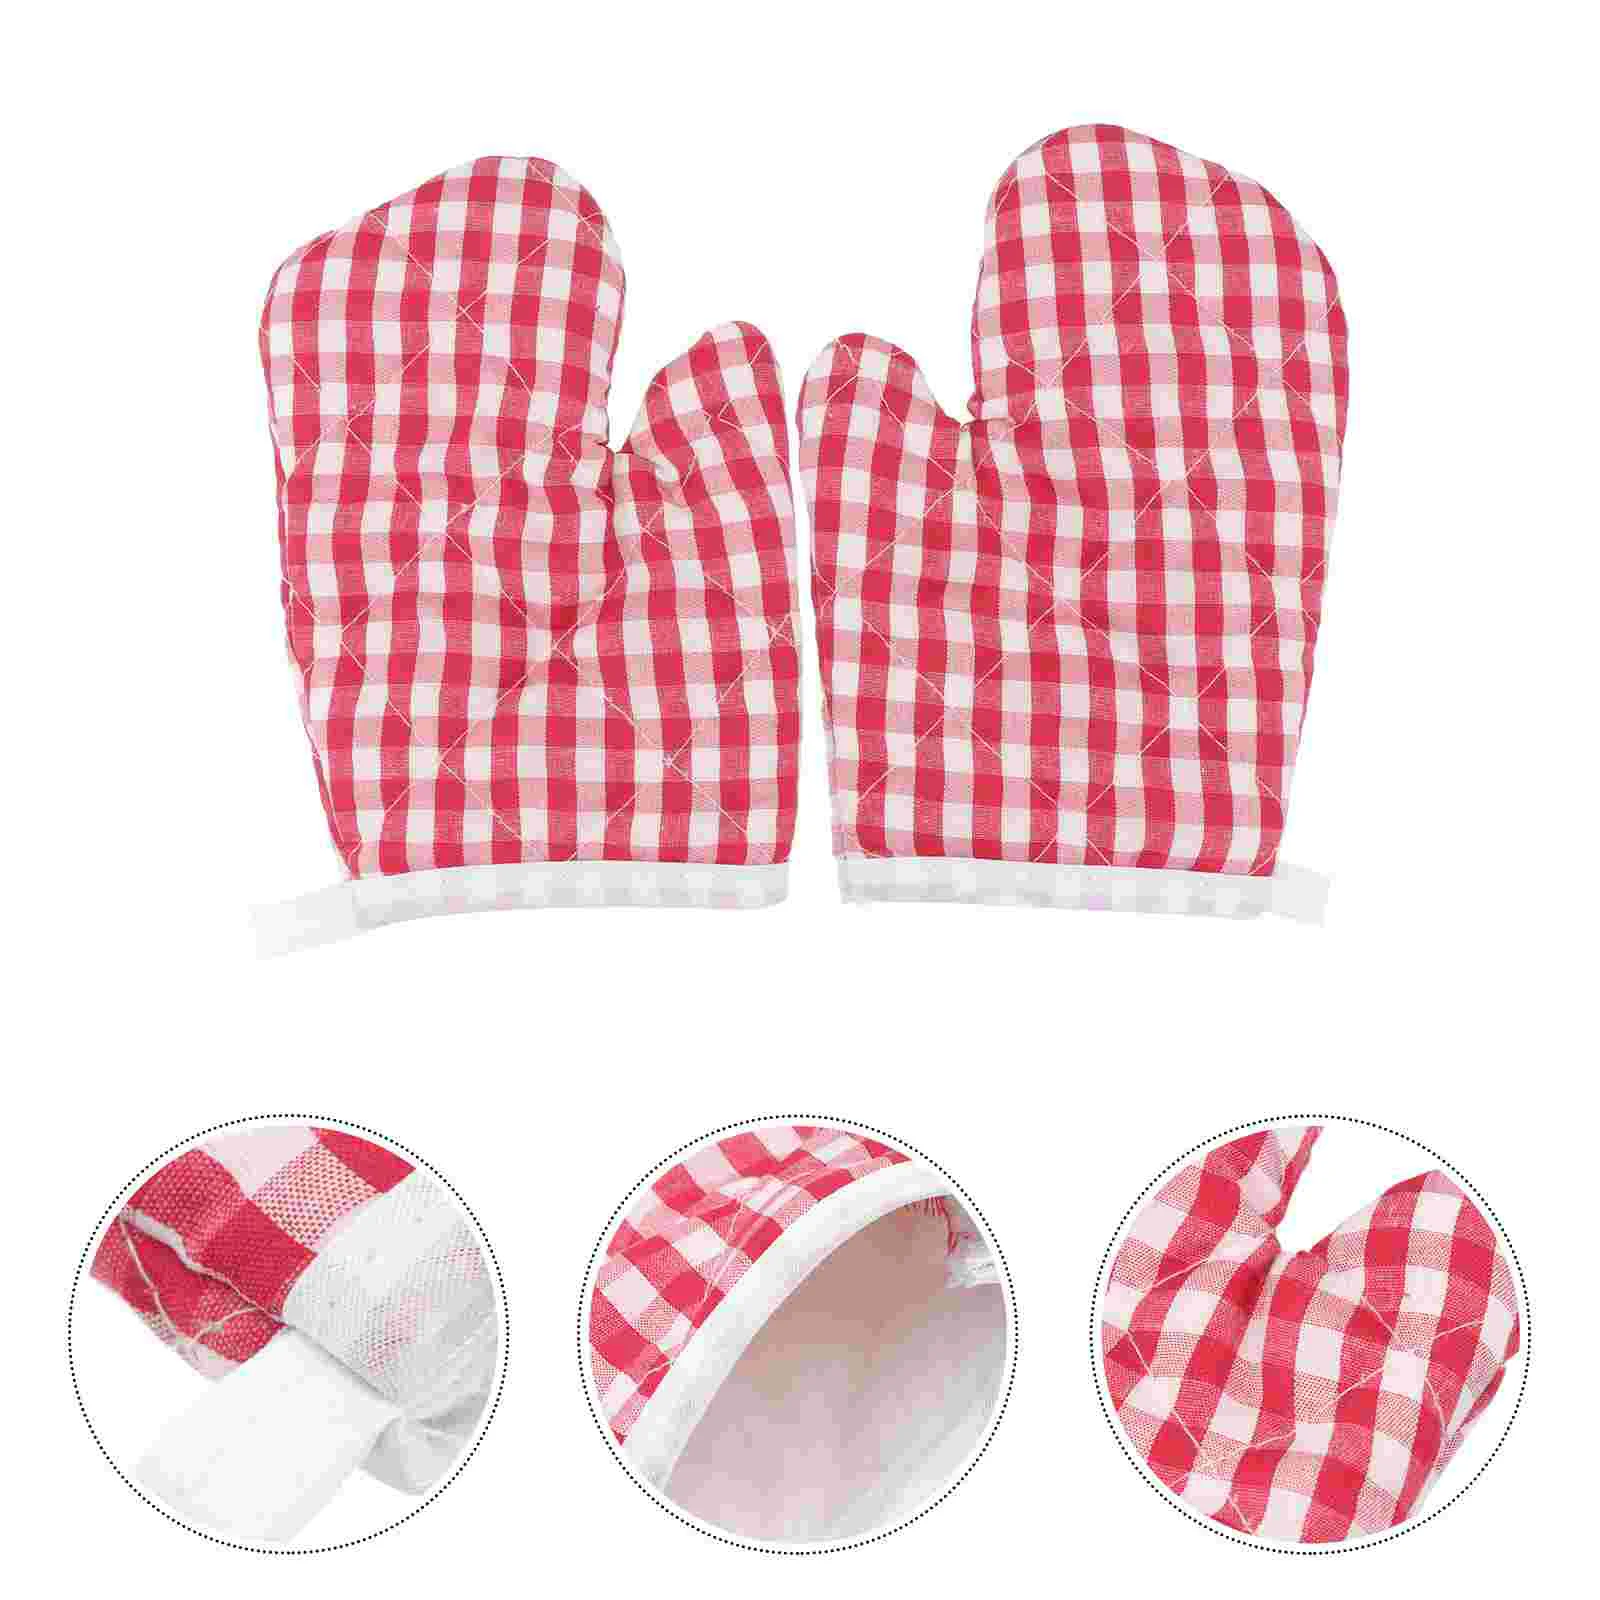 

Gloves Oven Mitts Kids Baking Kitchen Heat Mittens Children Resistant Microwave Mitt Cooking Pot Bbq Grilling Hot Barbecue Anti